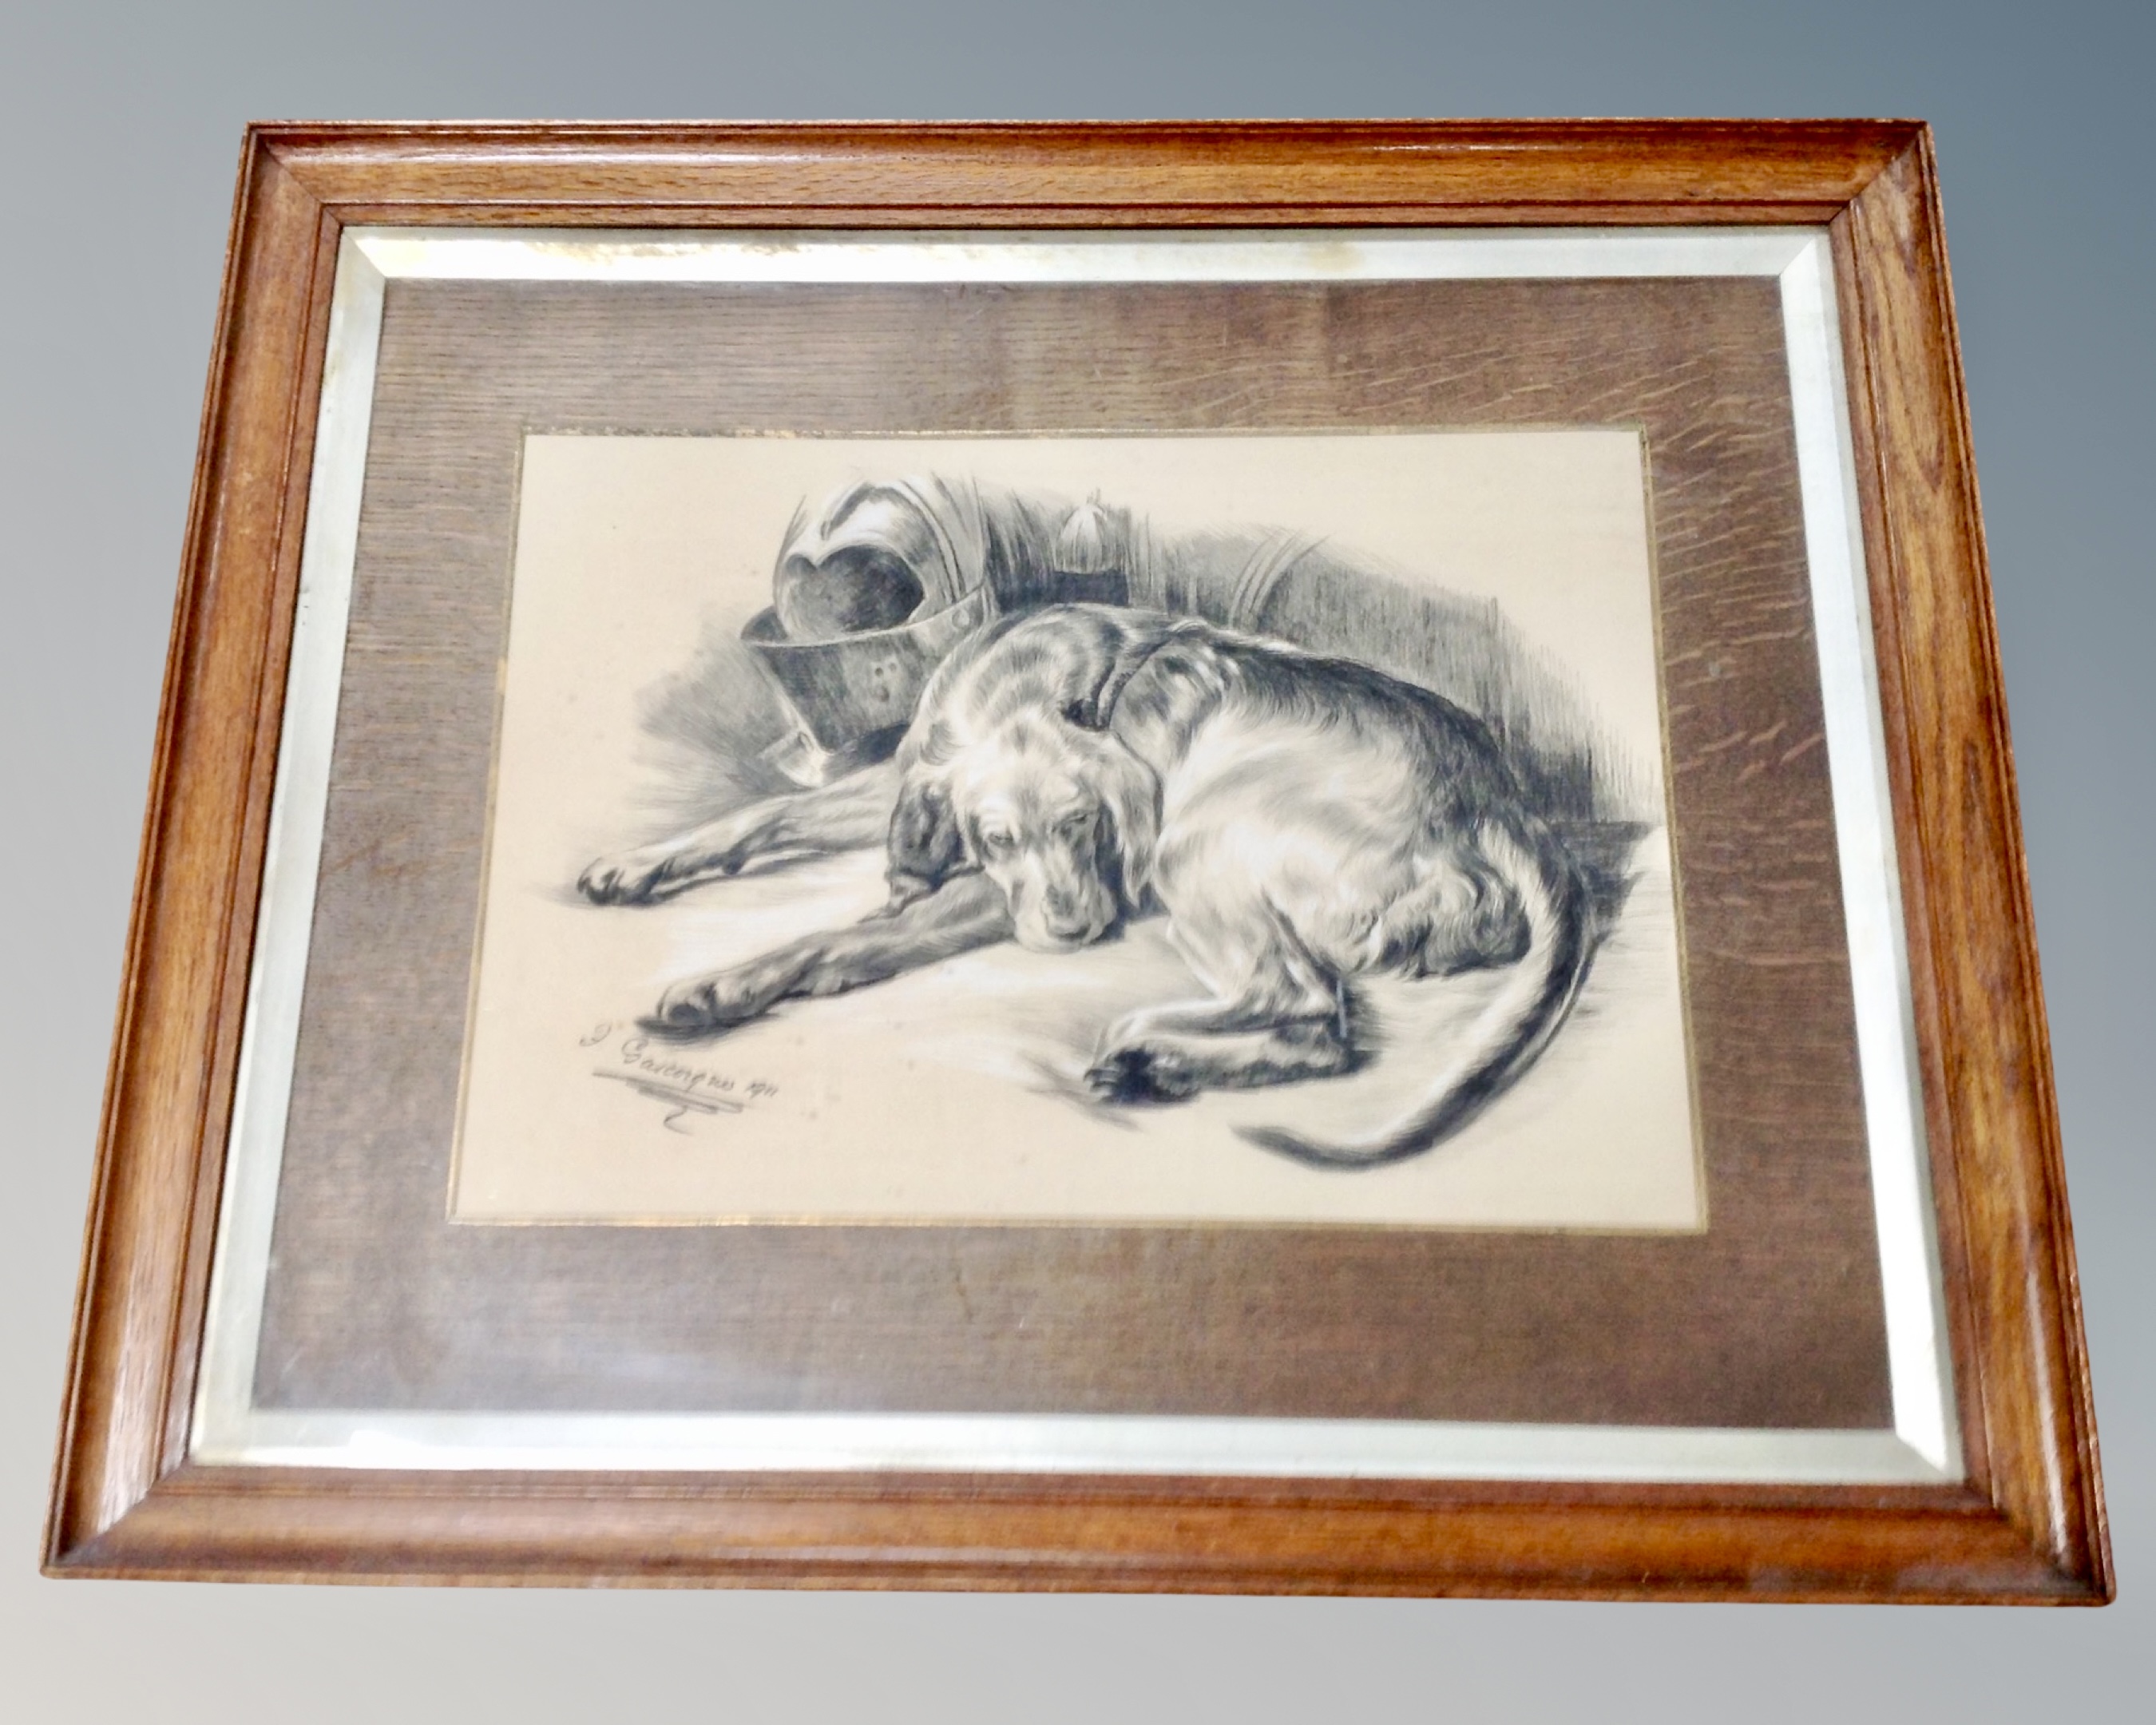 Gascoigne : Sleeping dog, pastel and pencil drawing, dated 1911, in frame and mount.